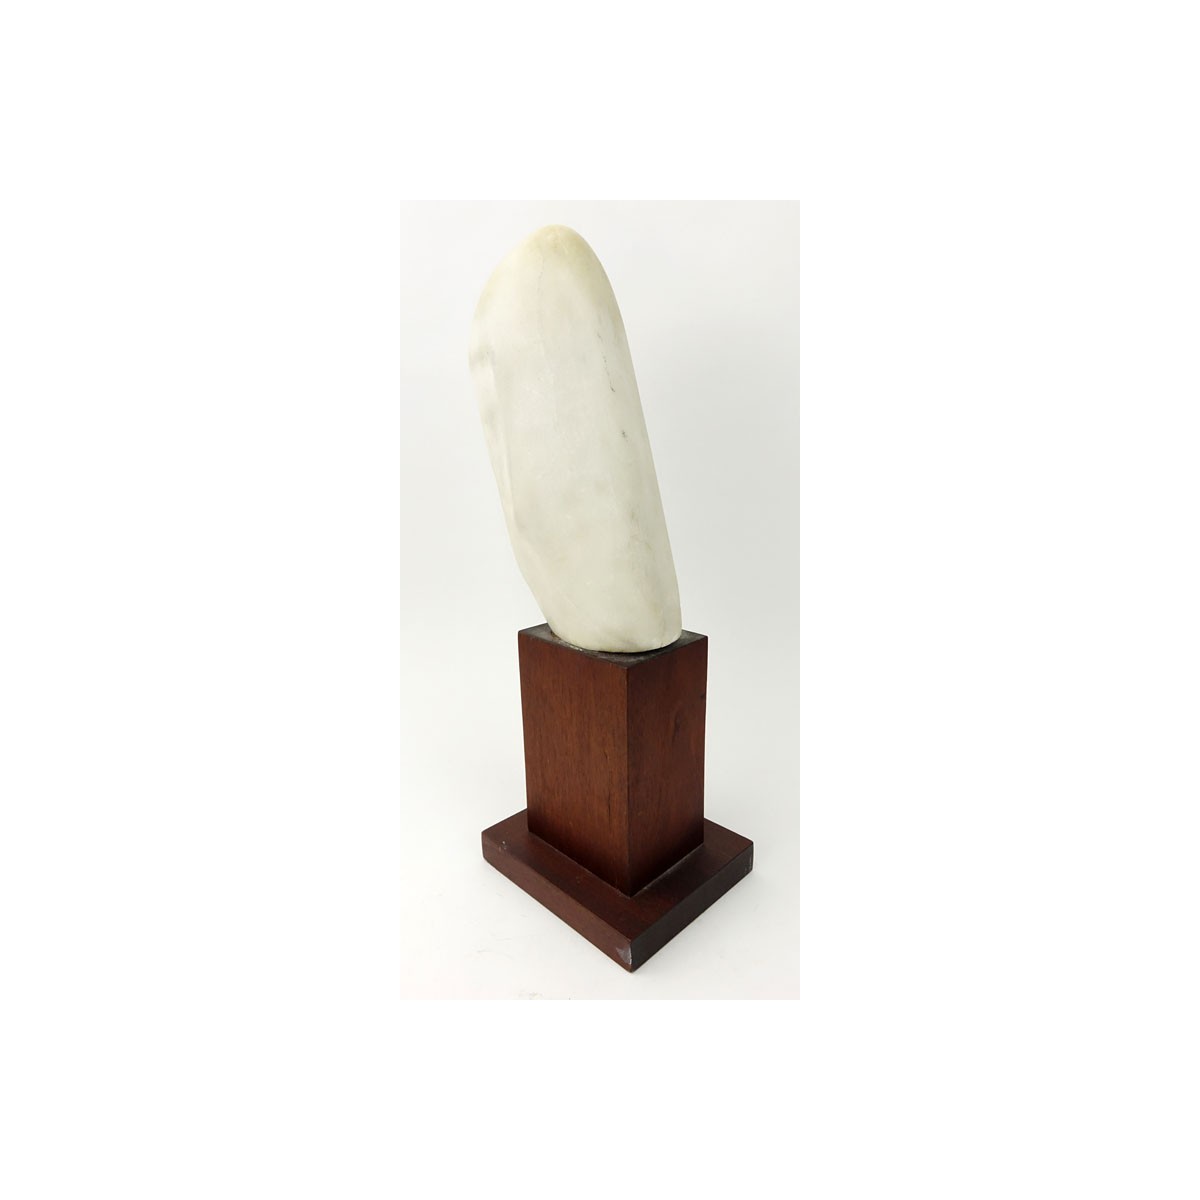 Mid Century Abstract Marble Bust on Wooden Base. Signed. Good condition. Measures 19" H. (estimate 